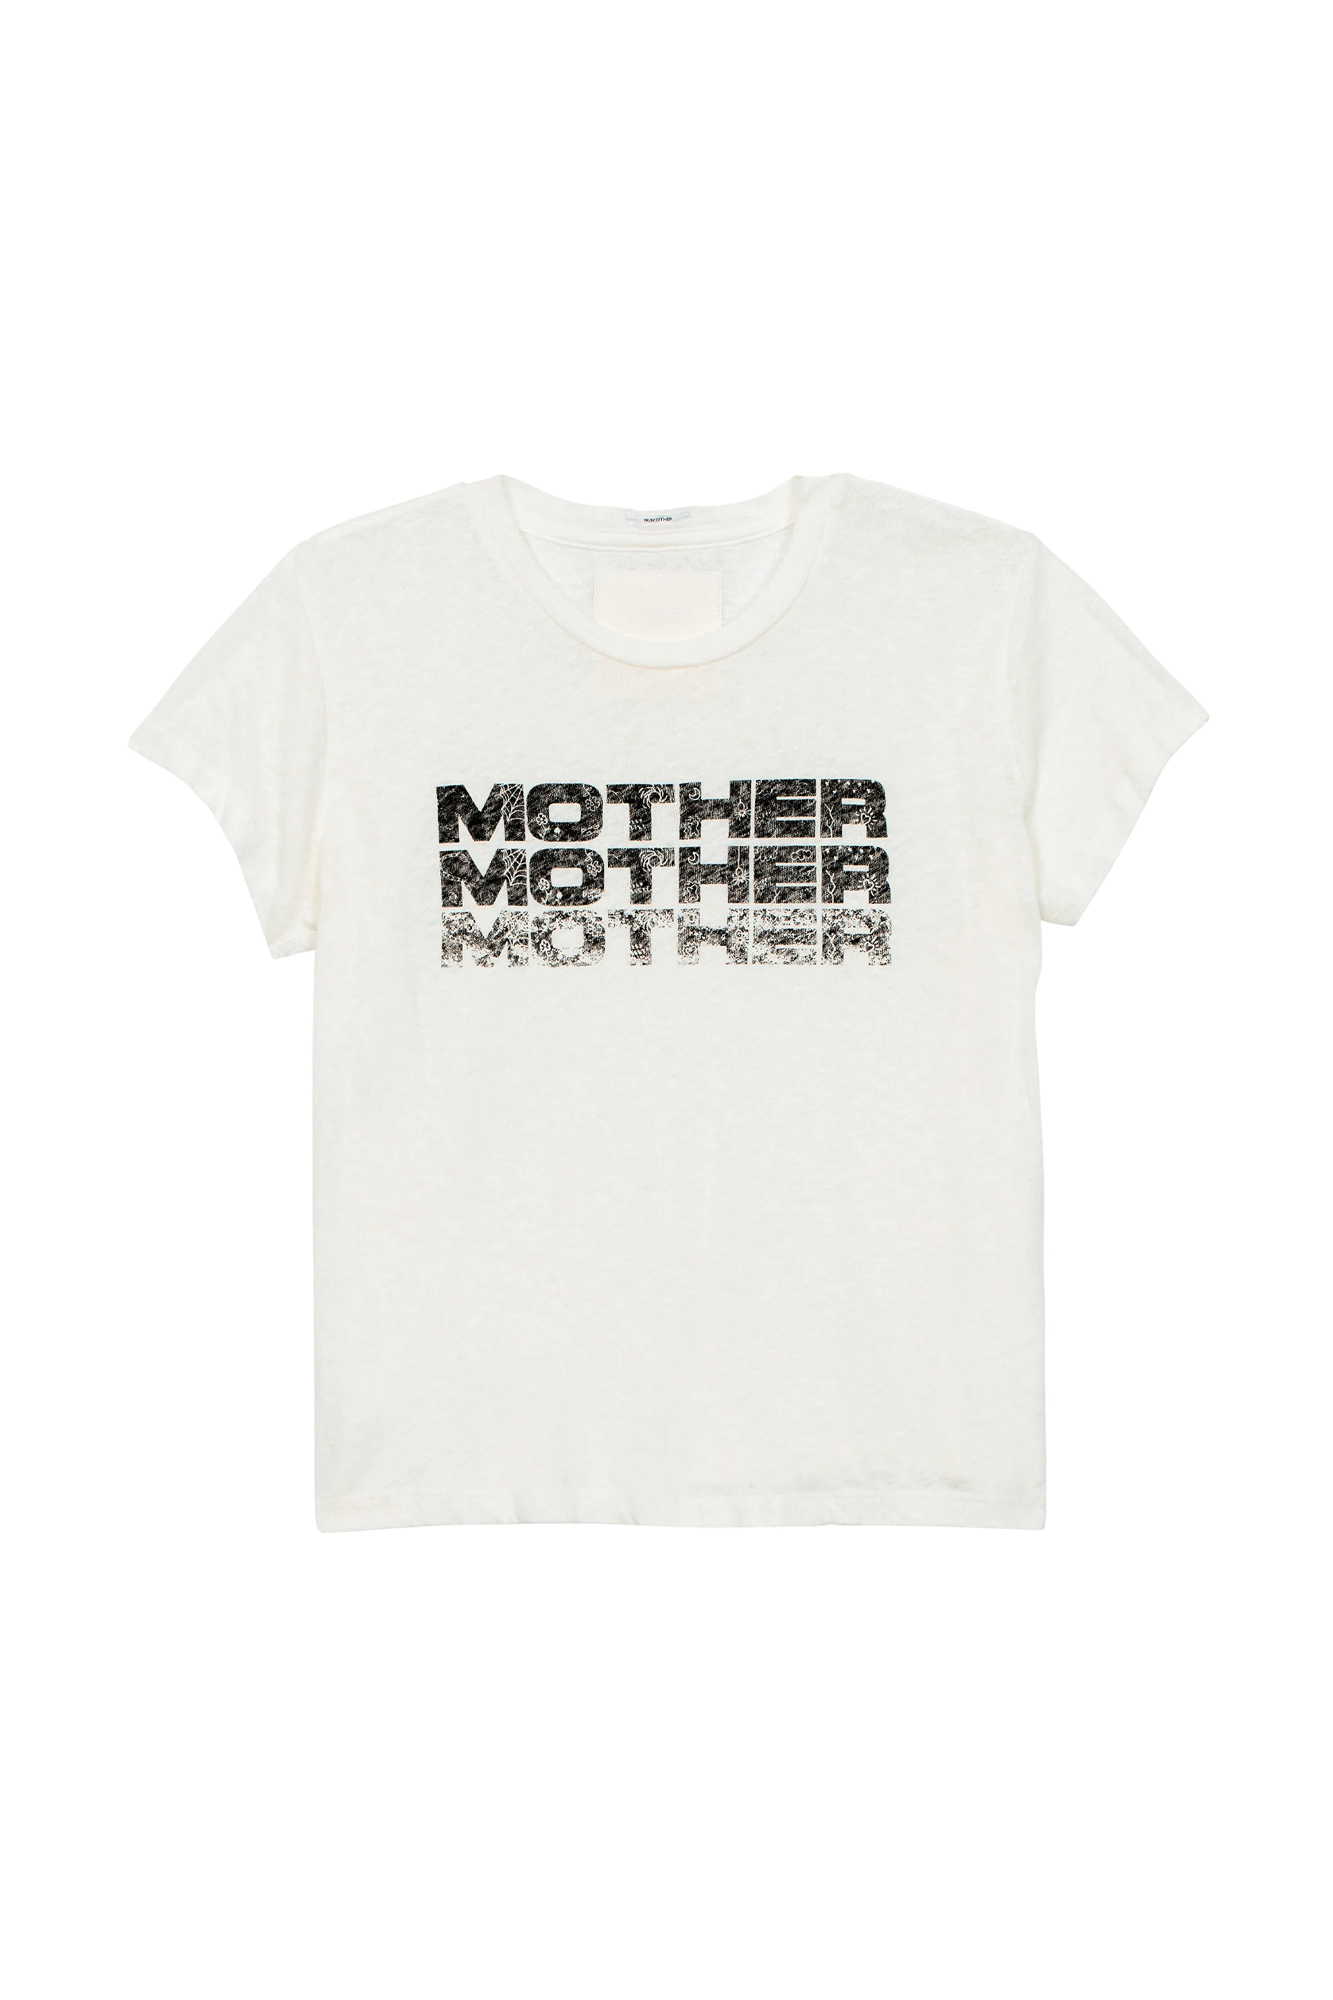 The Sinful from Mother is a vintage-inspired crewneck tee made with a high-quality blend of cotton and linen. With its slim fit and subtle logo, the design is perfect for everyday wear. Enjoy a superior level of comfort that's built to last.